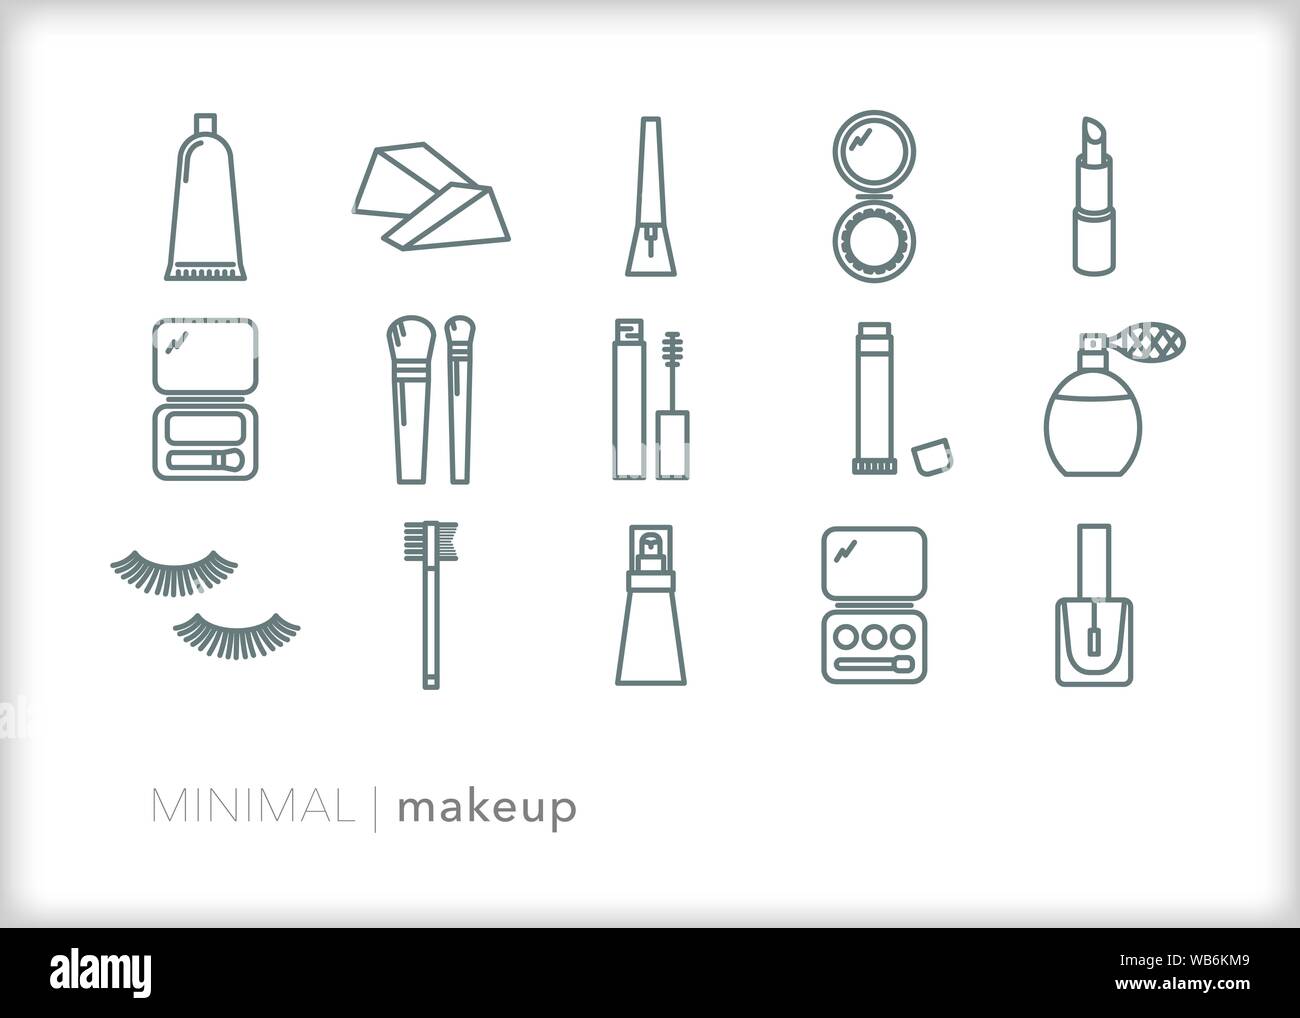 Set of 15 makeup line icons for faces, eyes and skin cosmetics in the beauty industry Stock Vector